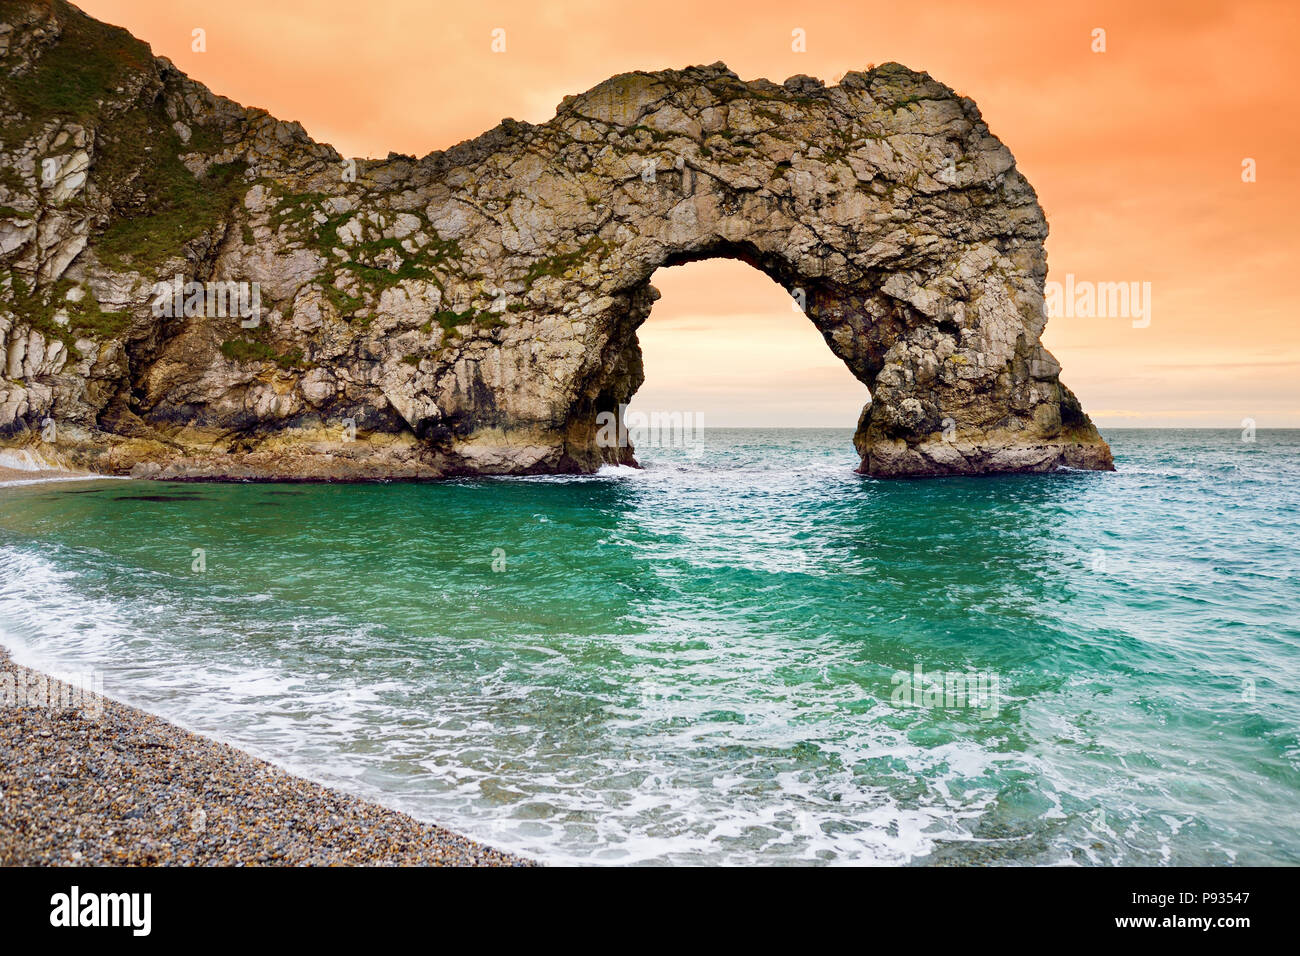 Durdle Door, world famous geological wonder, a natural limestone arch on the Jurassic Coast near Lulworth in Dorset, England. Stock Photo